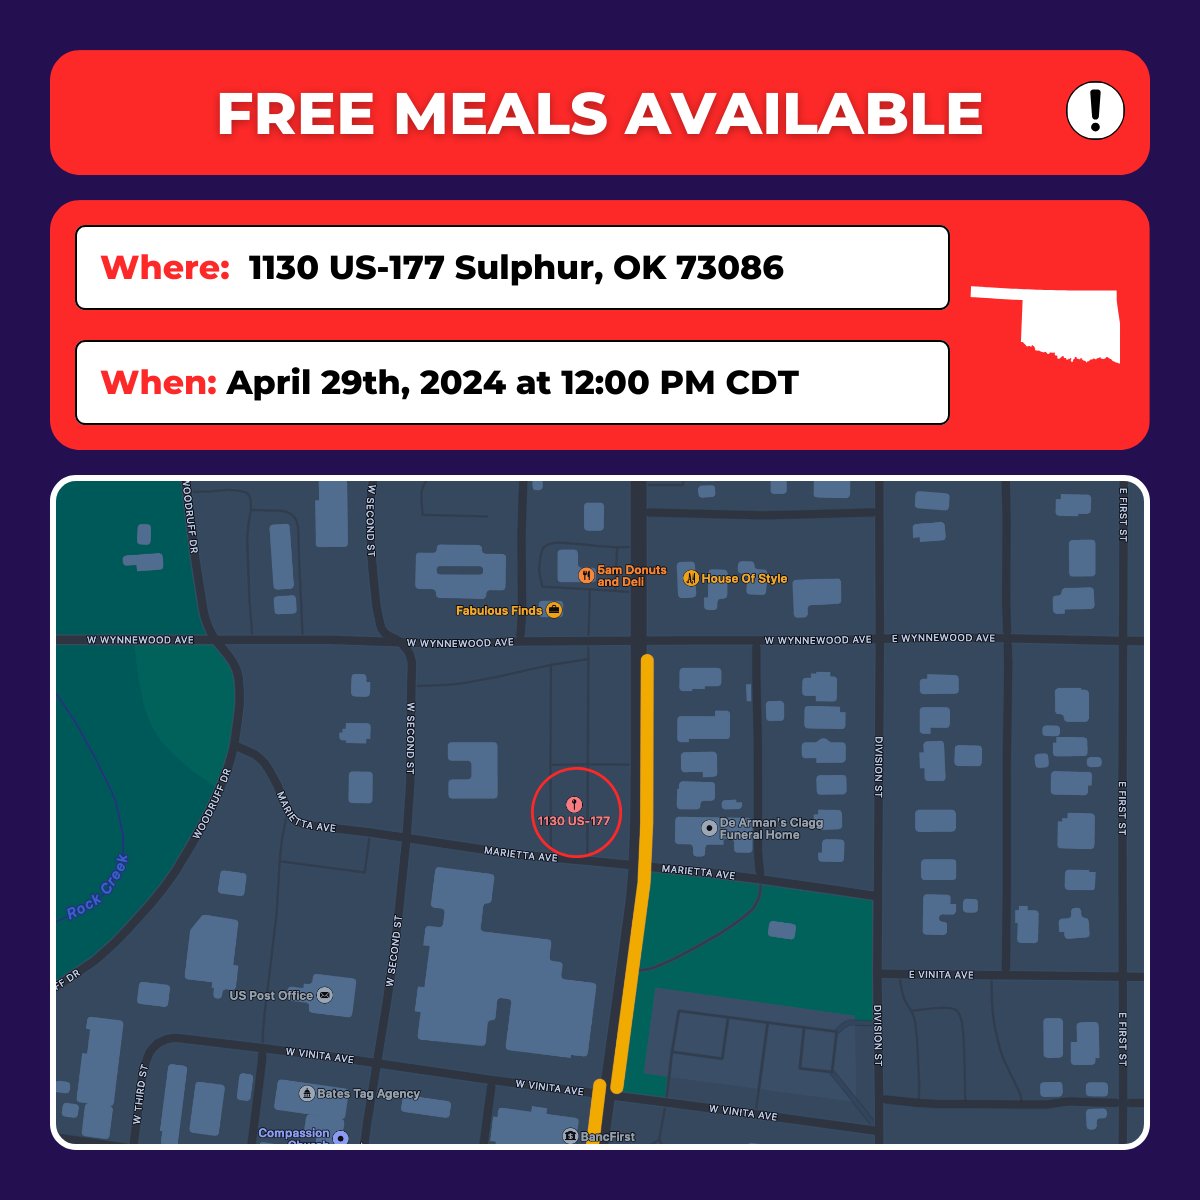 🍔Free Hot Meals Available🍔 @ChrisHallWx and @MarcoPatriotsHQ are set up and cooking in Sulphur, OK. Everyone in town is welcome!